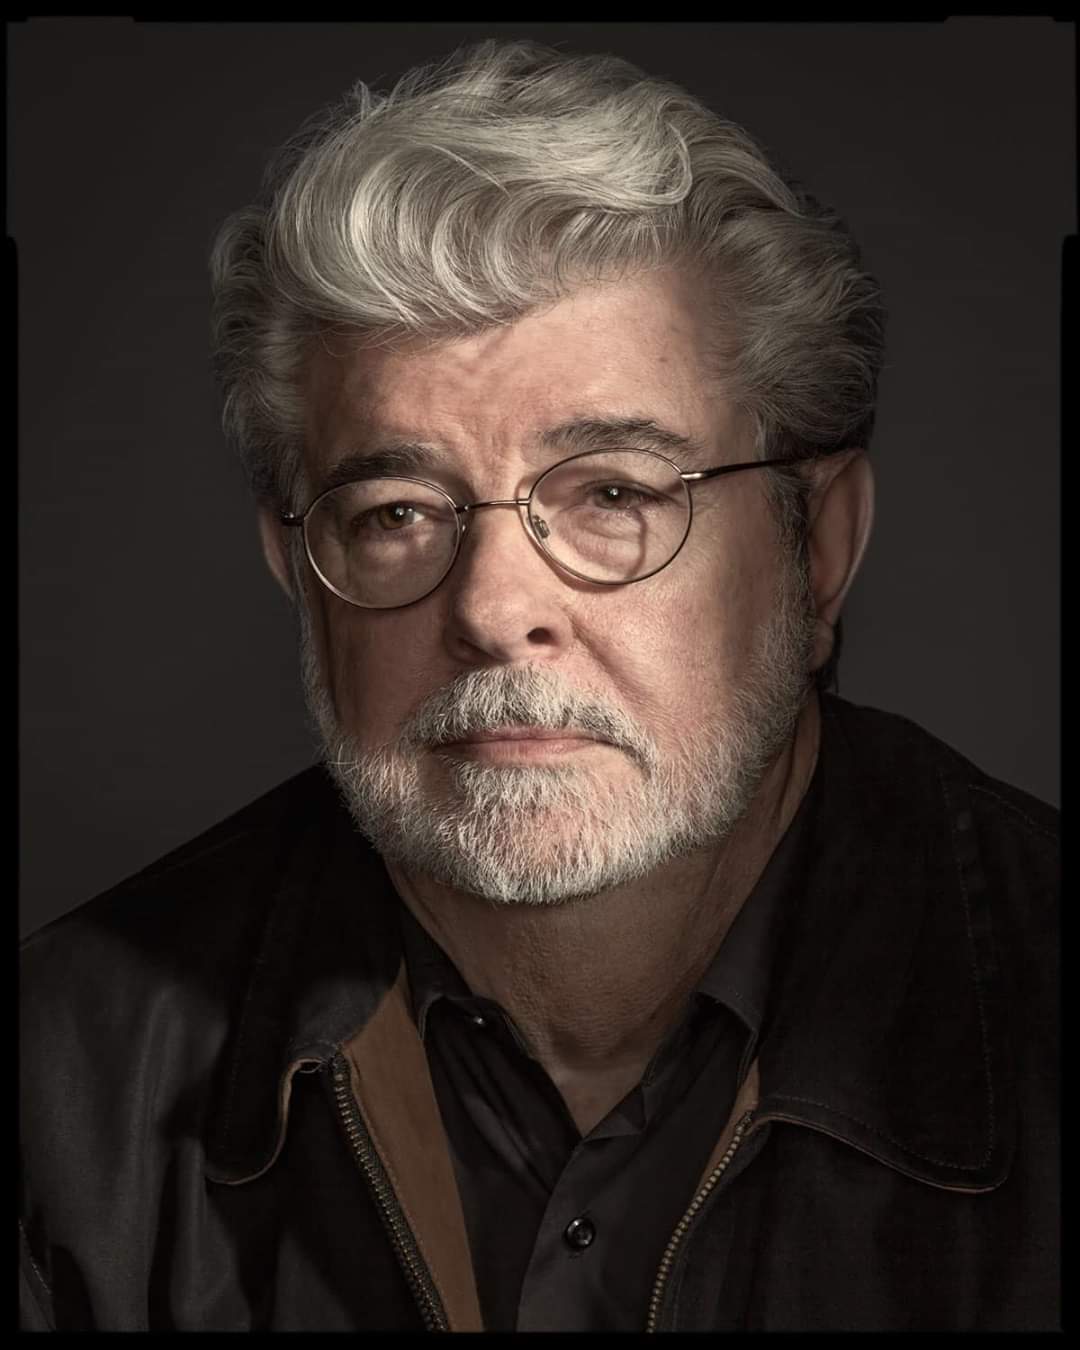 Happy Birthday, George Lucas! for his vision that has brought so many people together! 